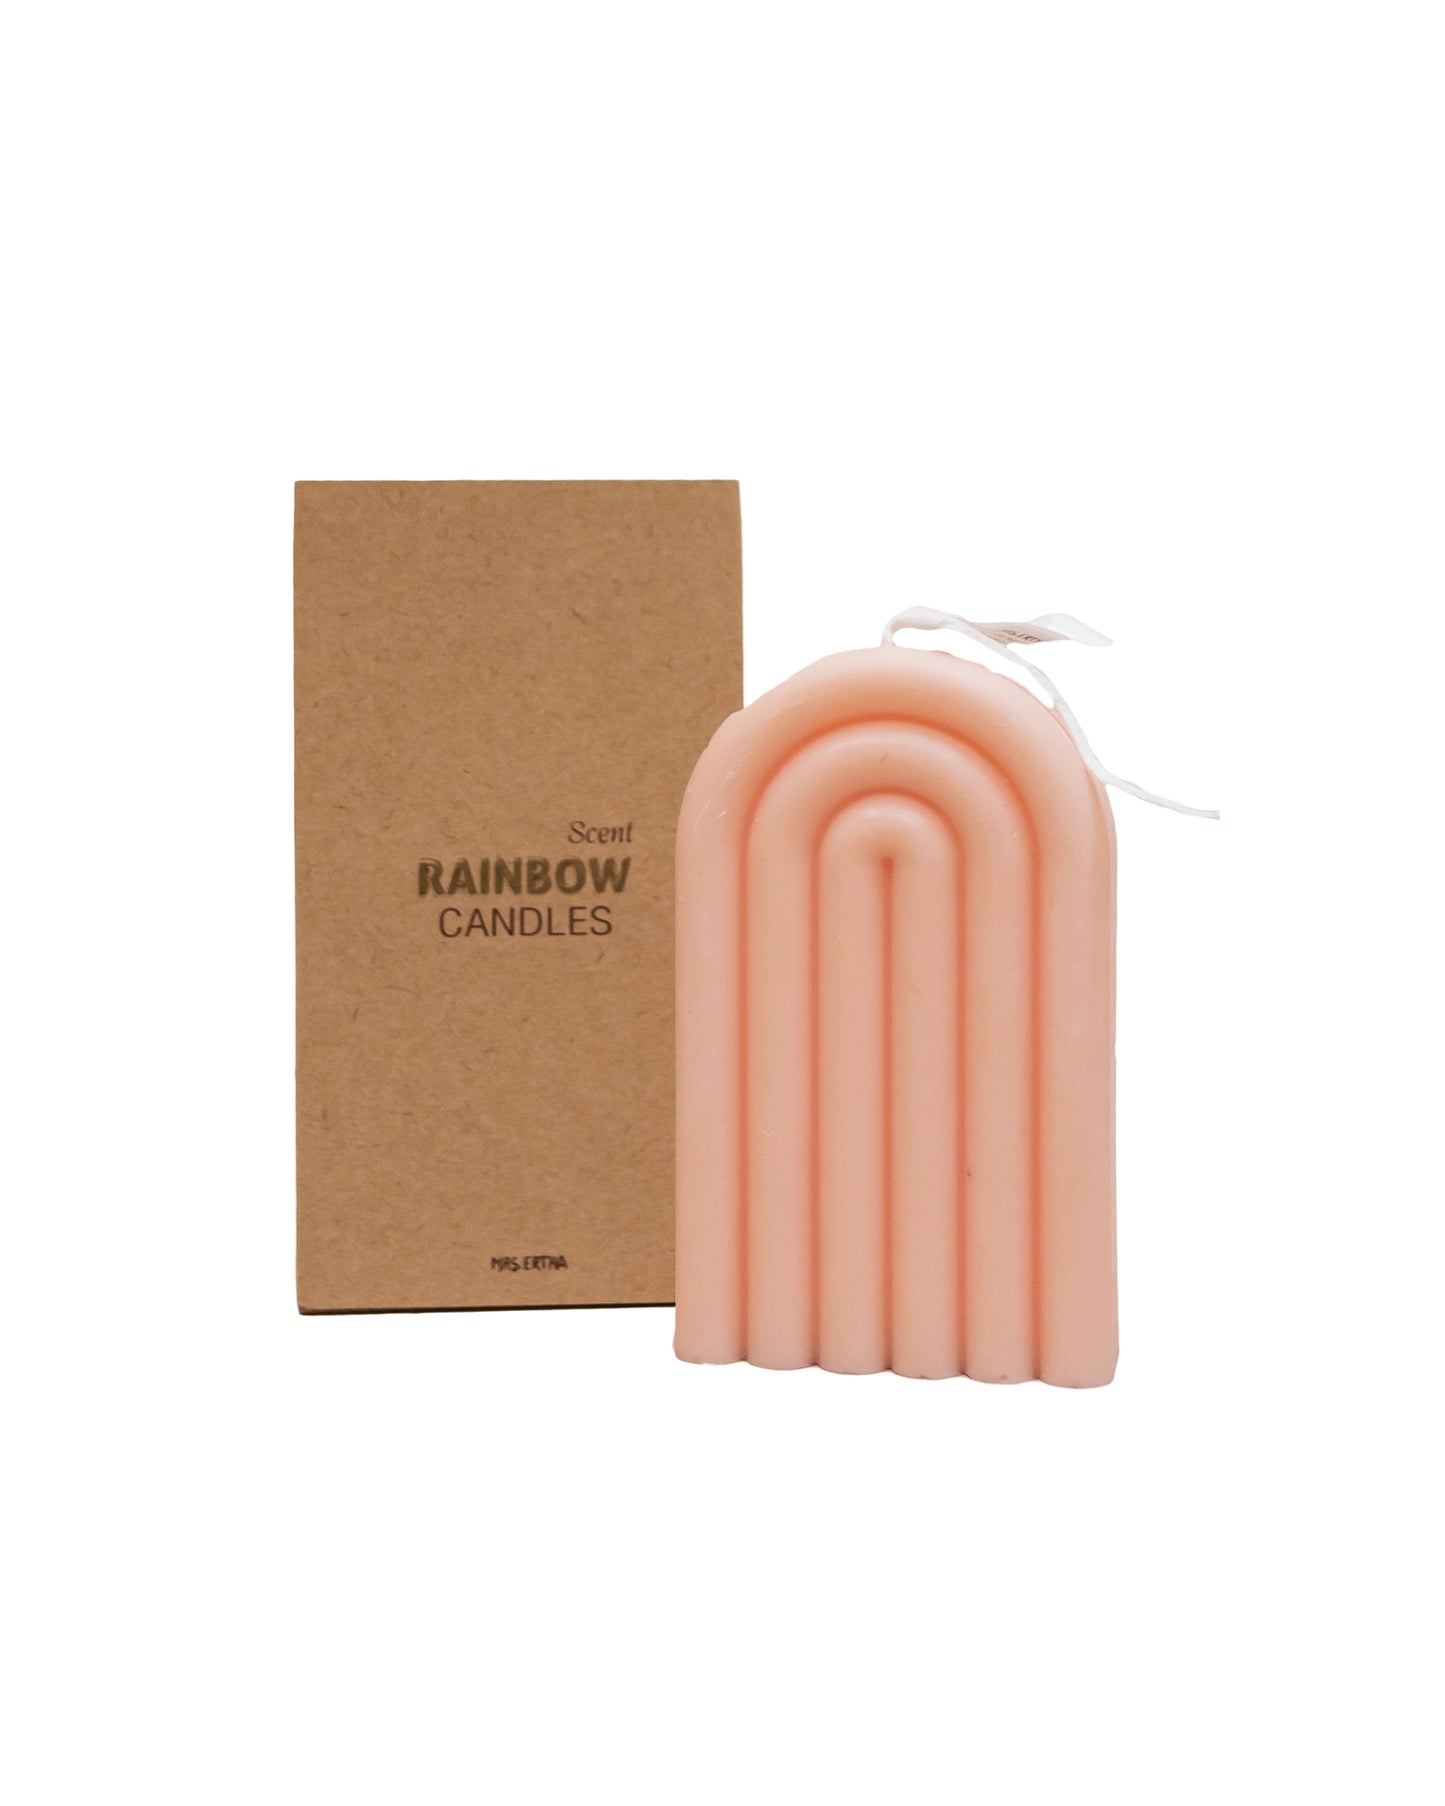 Rainbow Candles - Tiger Lily (Duft: Jasmin)